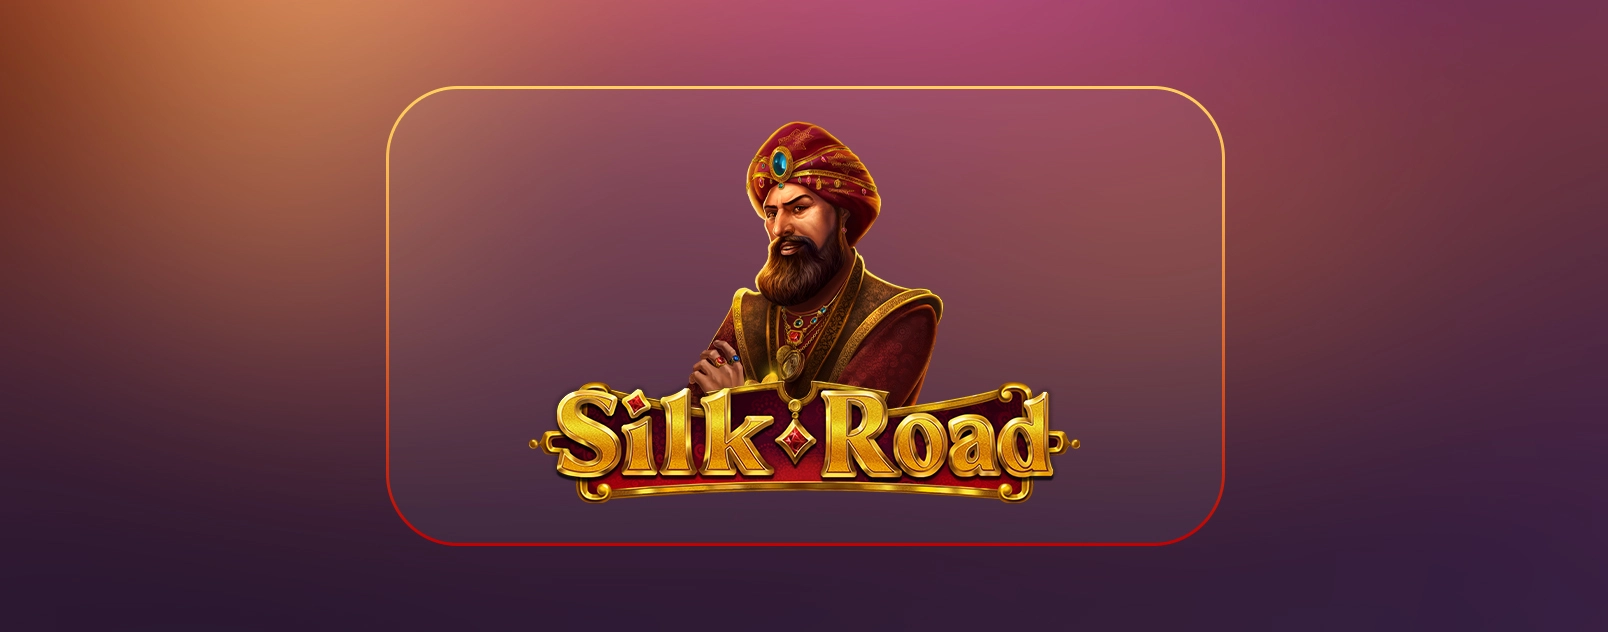 Silk Road - newest slot from Endorphina!